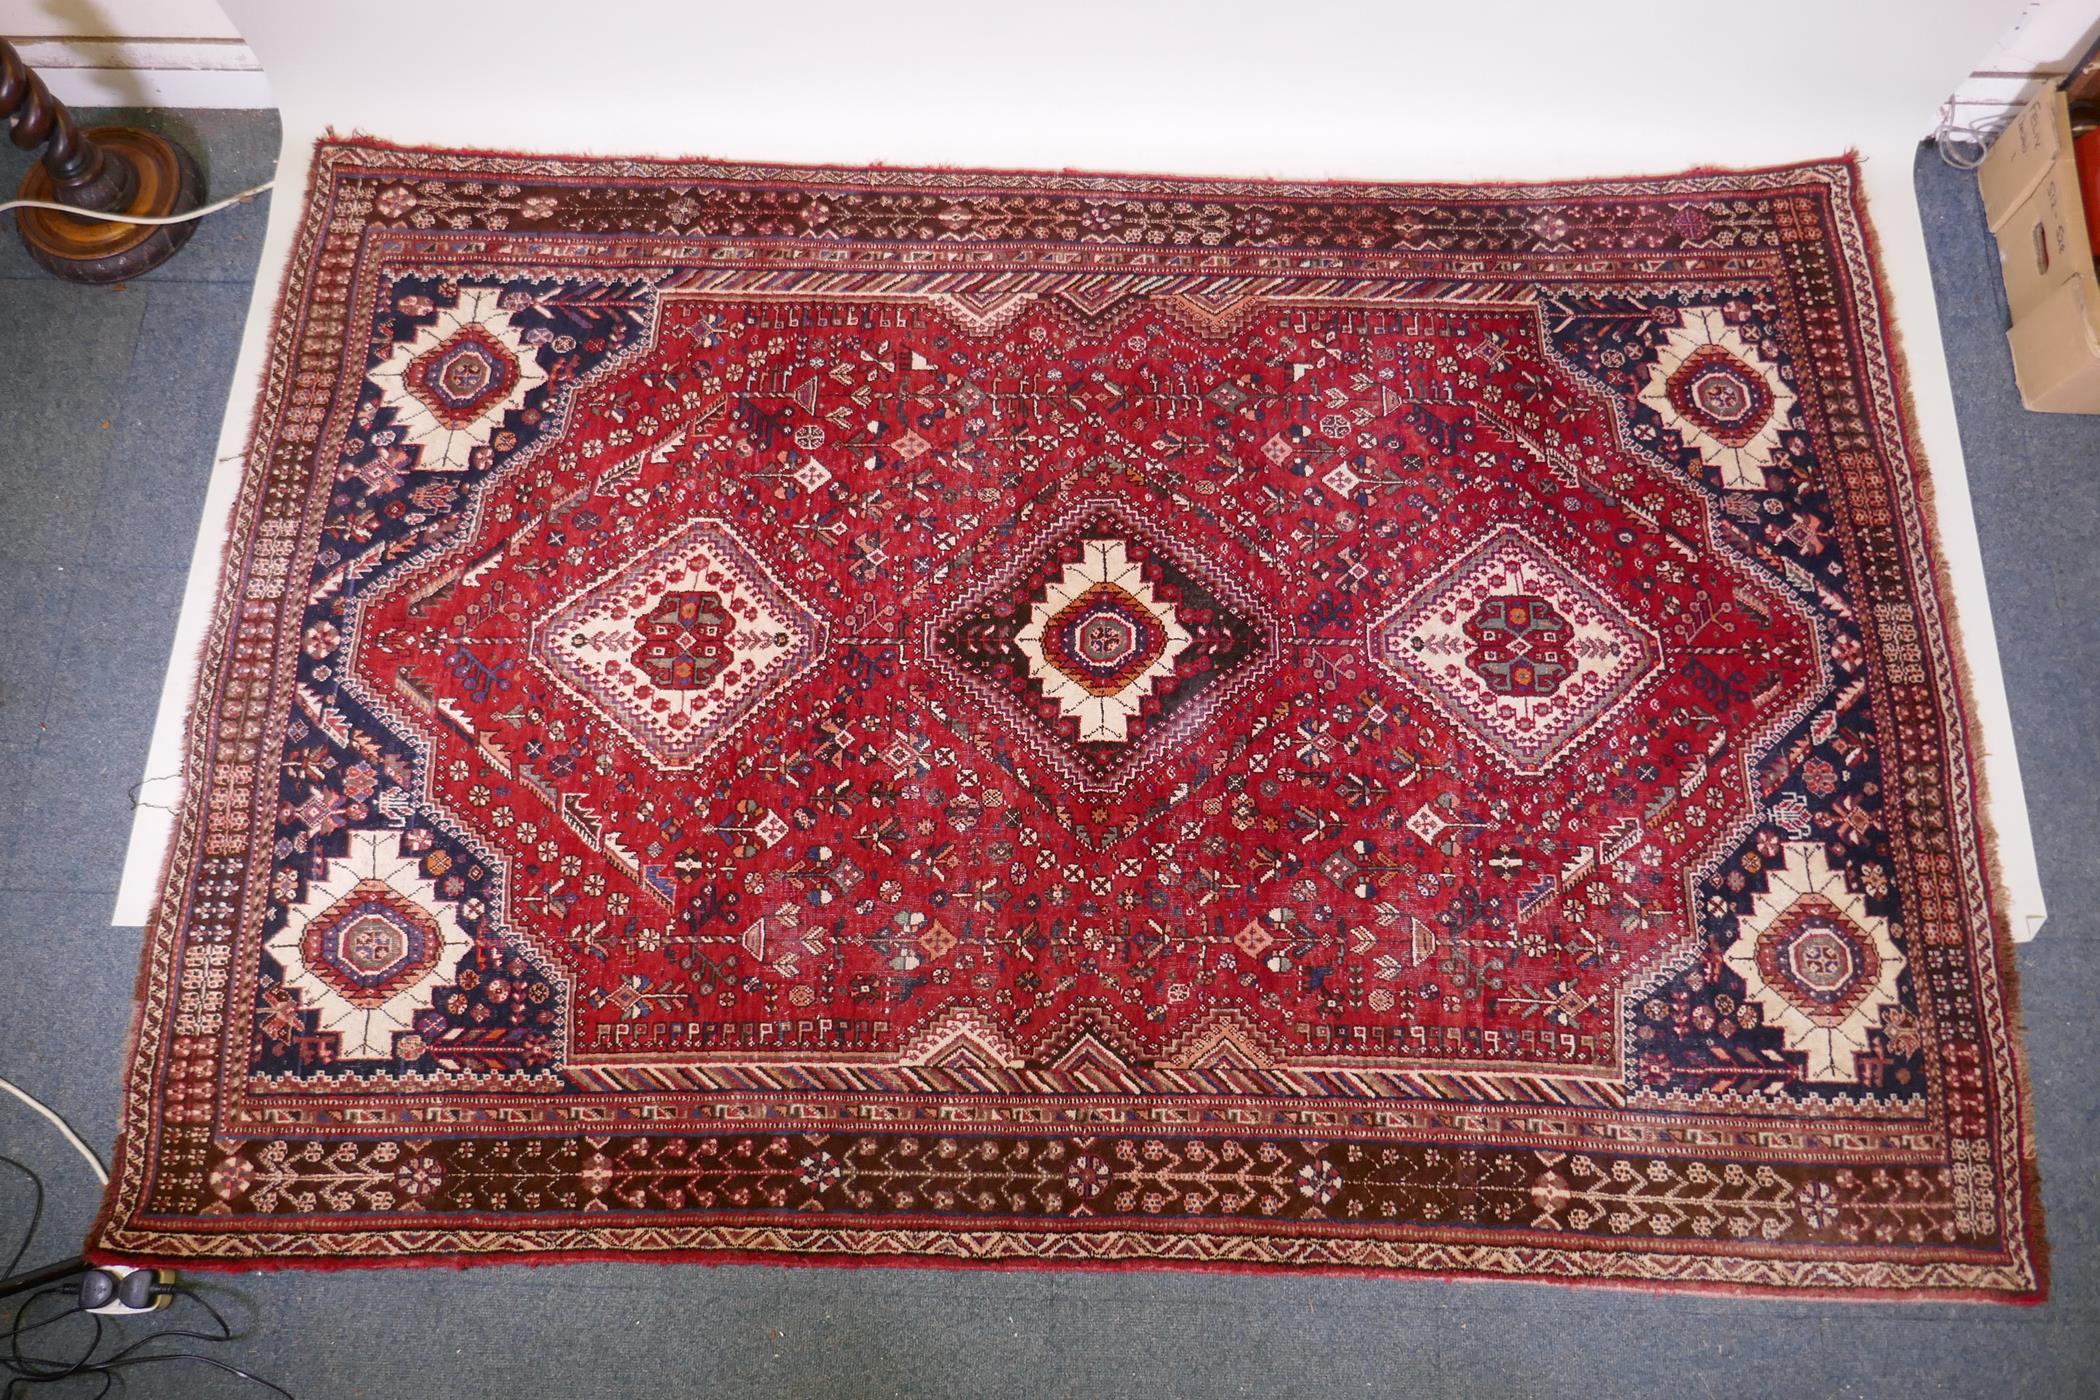 A hand woven red ground Persian carpet with a unique medallion design and chocolate brown borders,